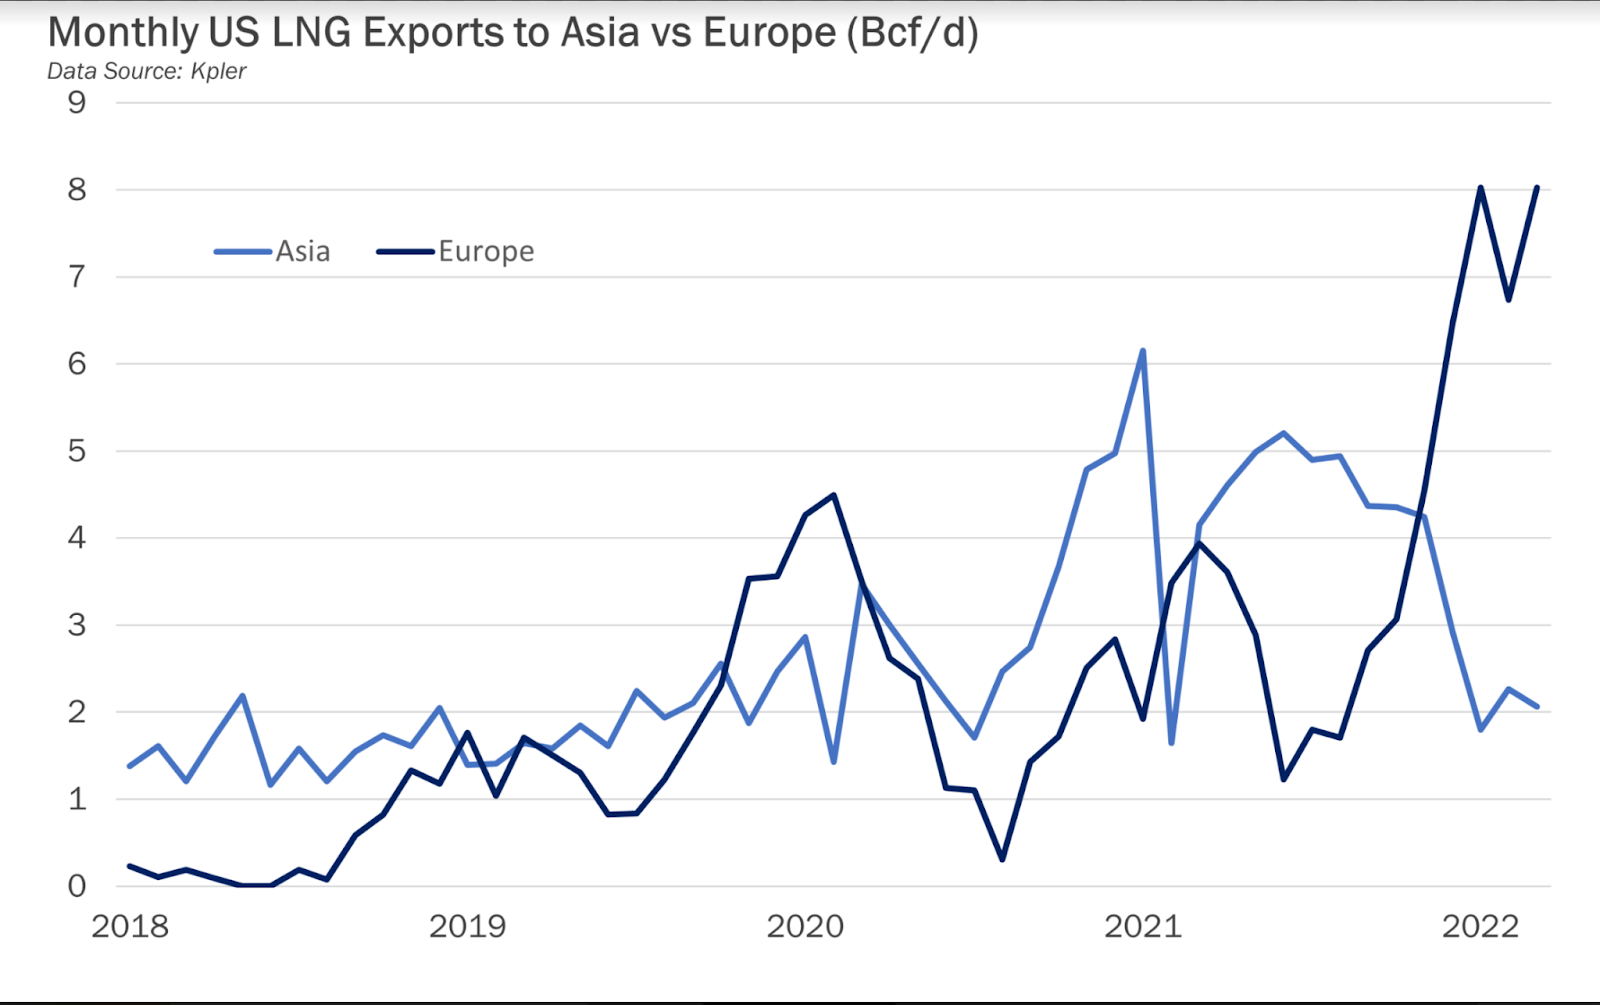 Monthly LNG Exports To Europe Vs. Asia